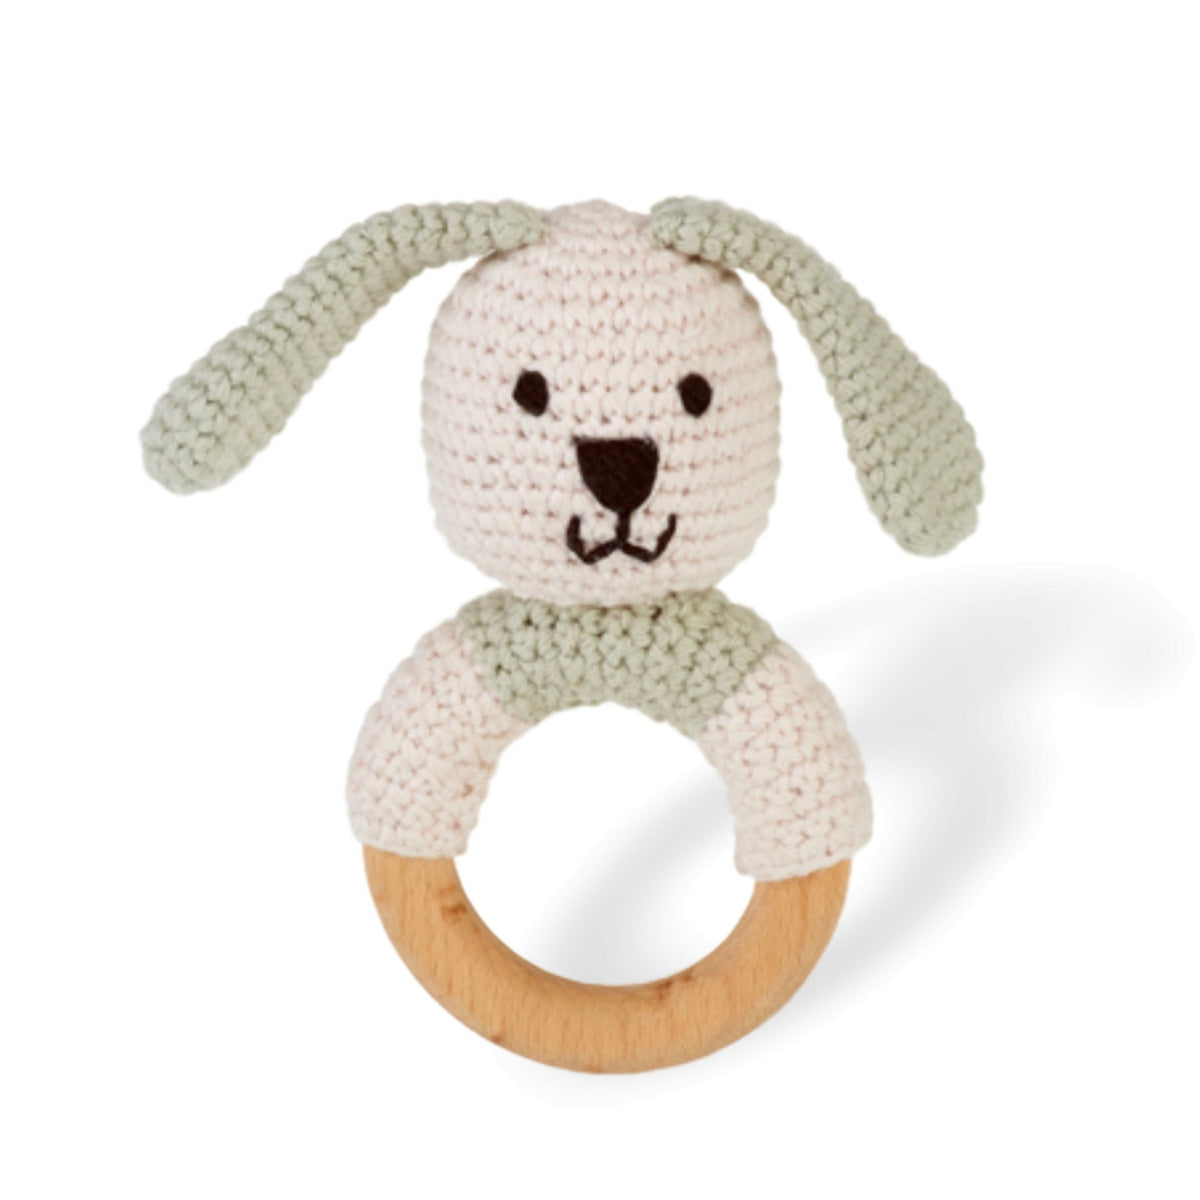 Wooden Ring Rattle - Bunny Toy